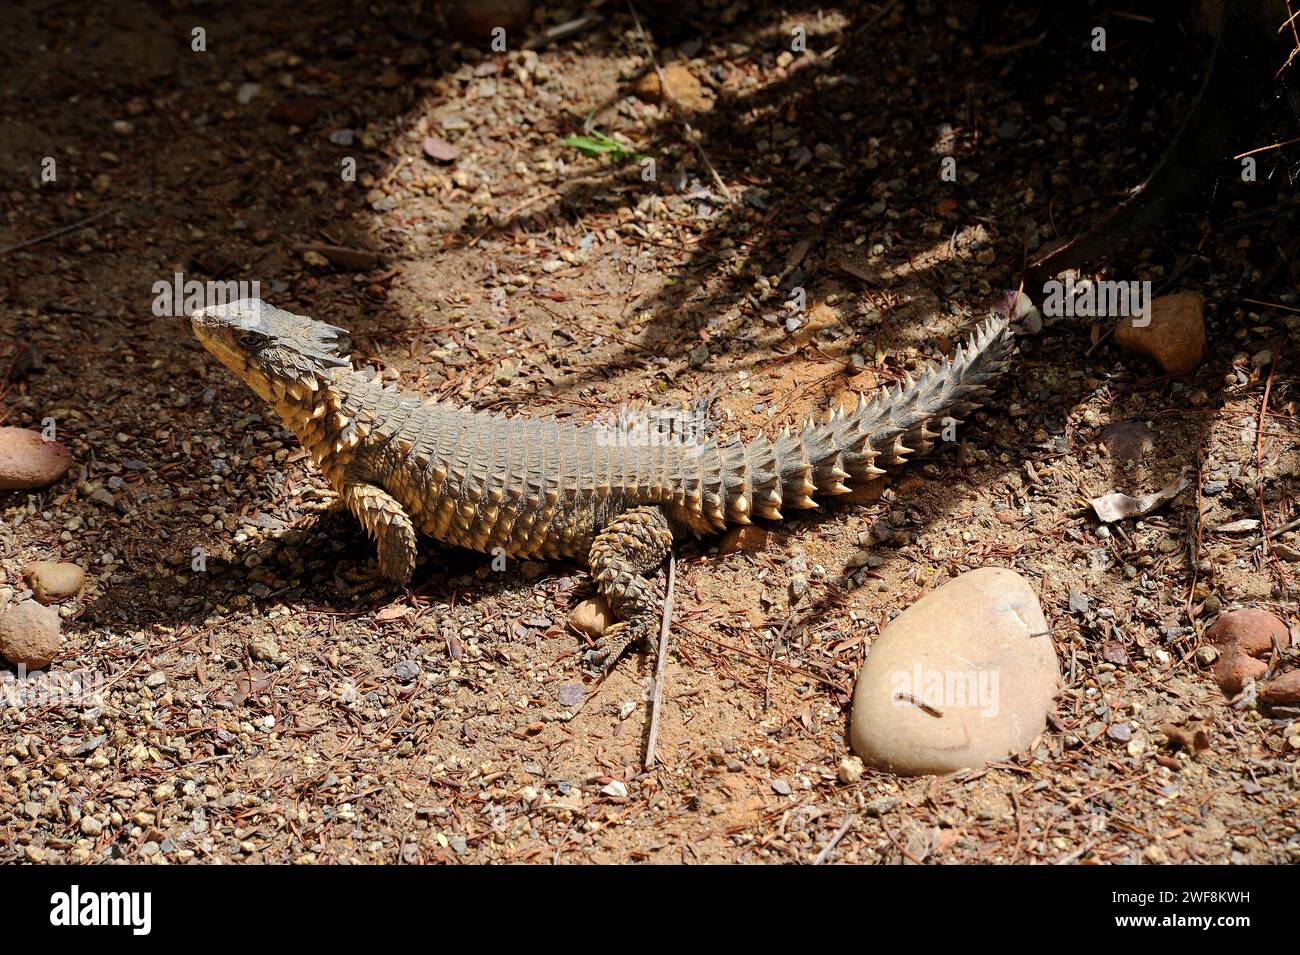 Sungazer (Cordylus giganteus) is a spiny lizard endemic to South Africa. Stock Photo